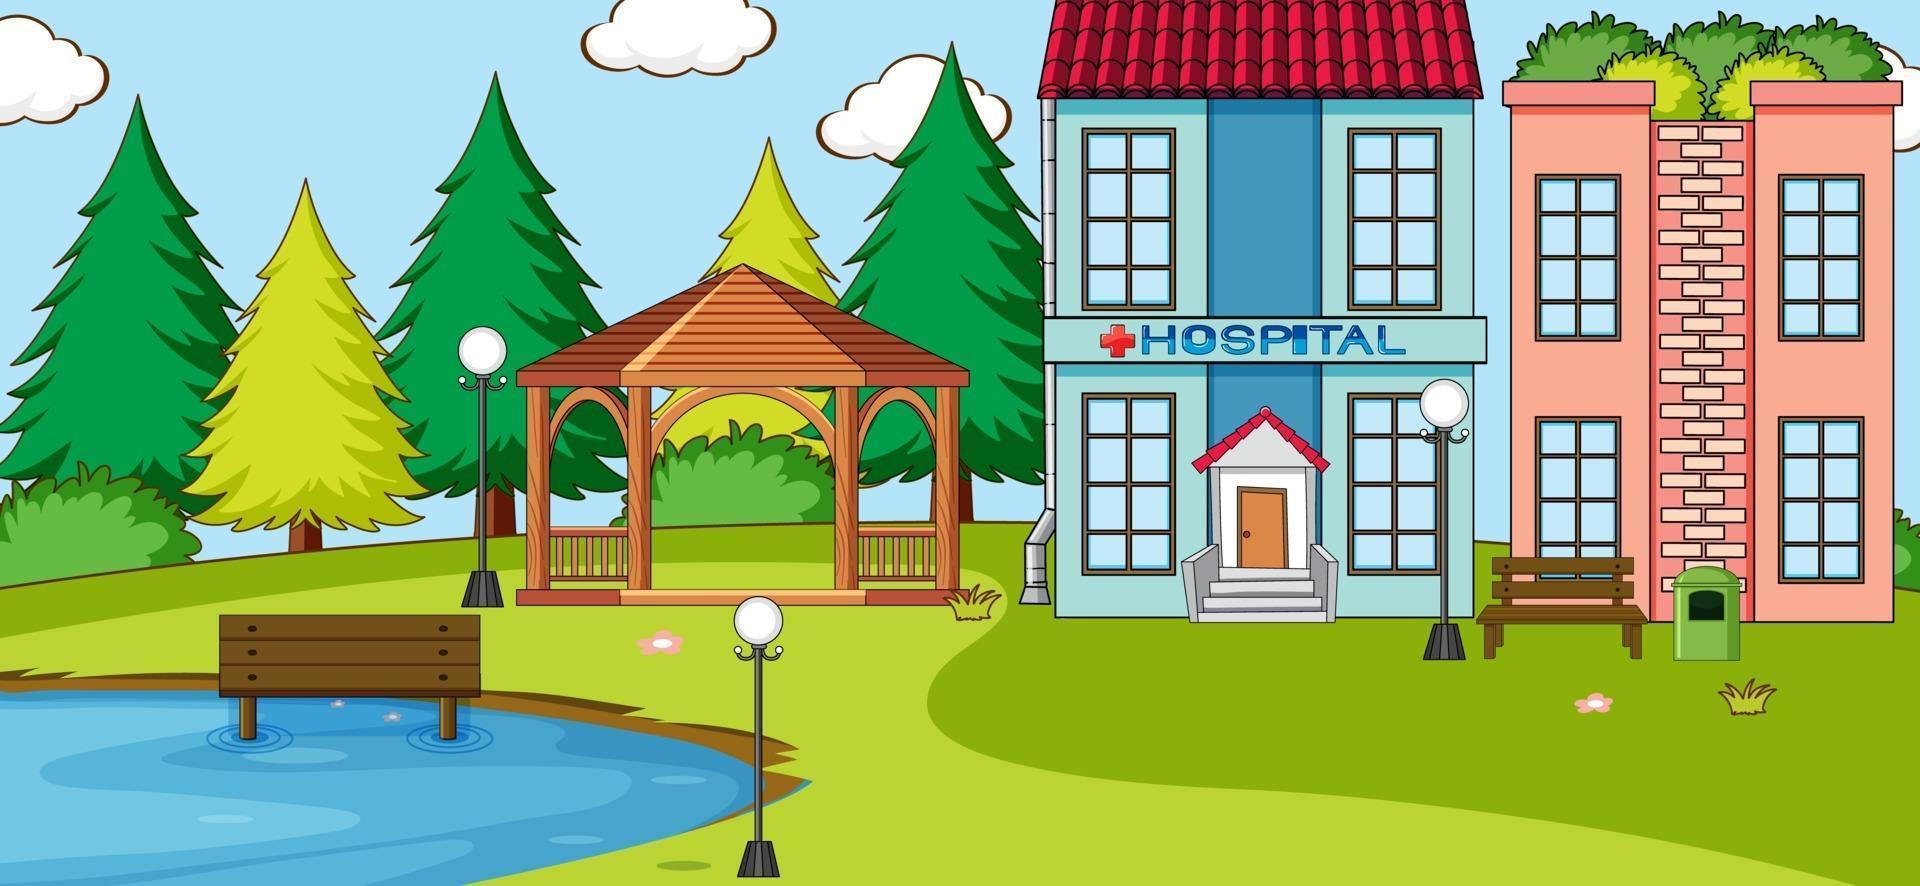 Park outdoor scene with hospital building vector